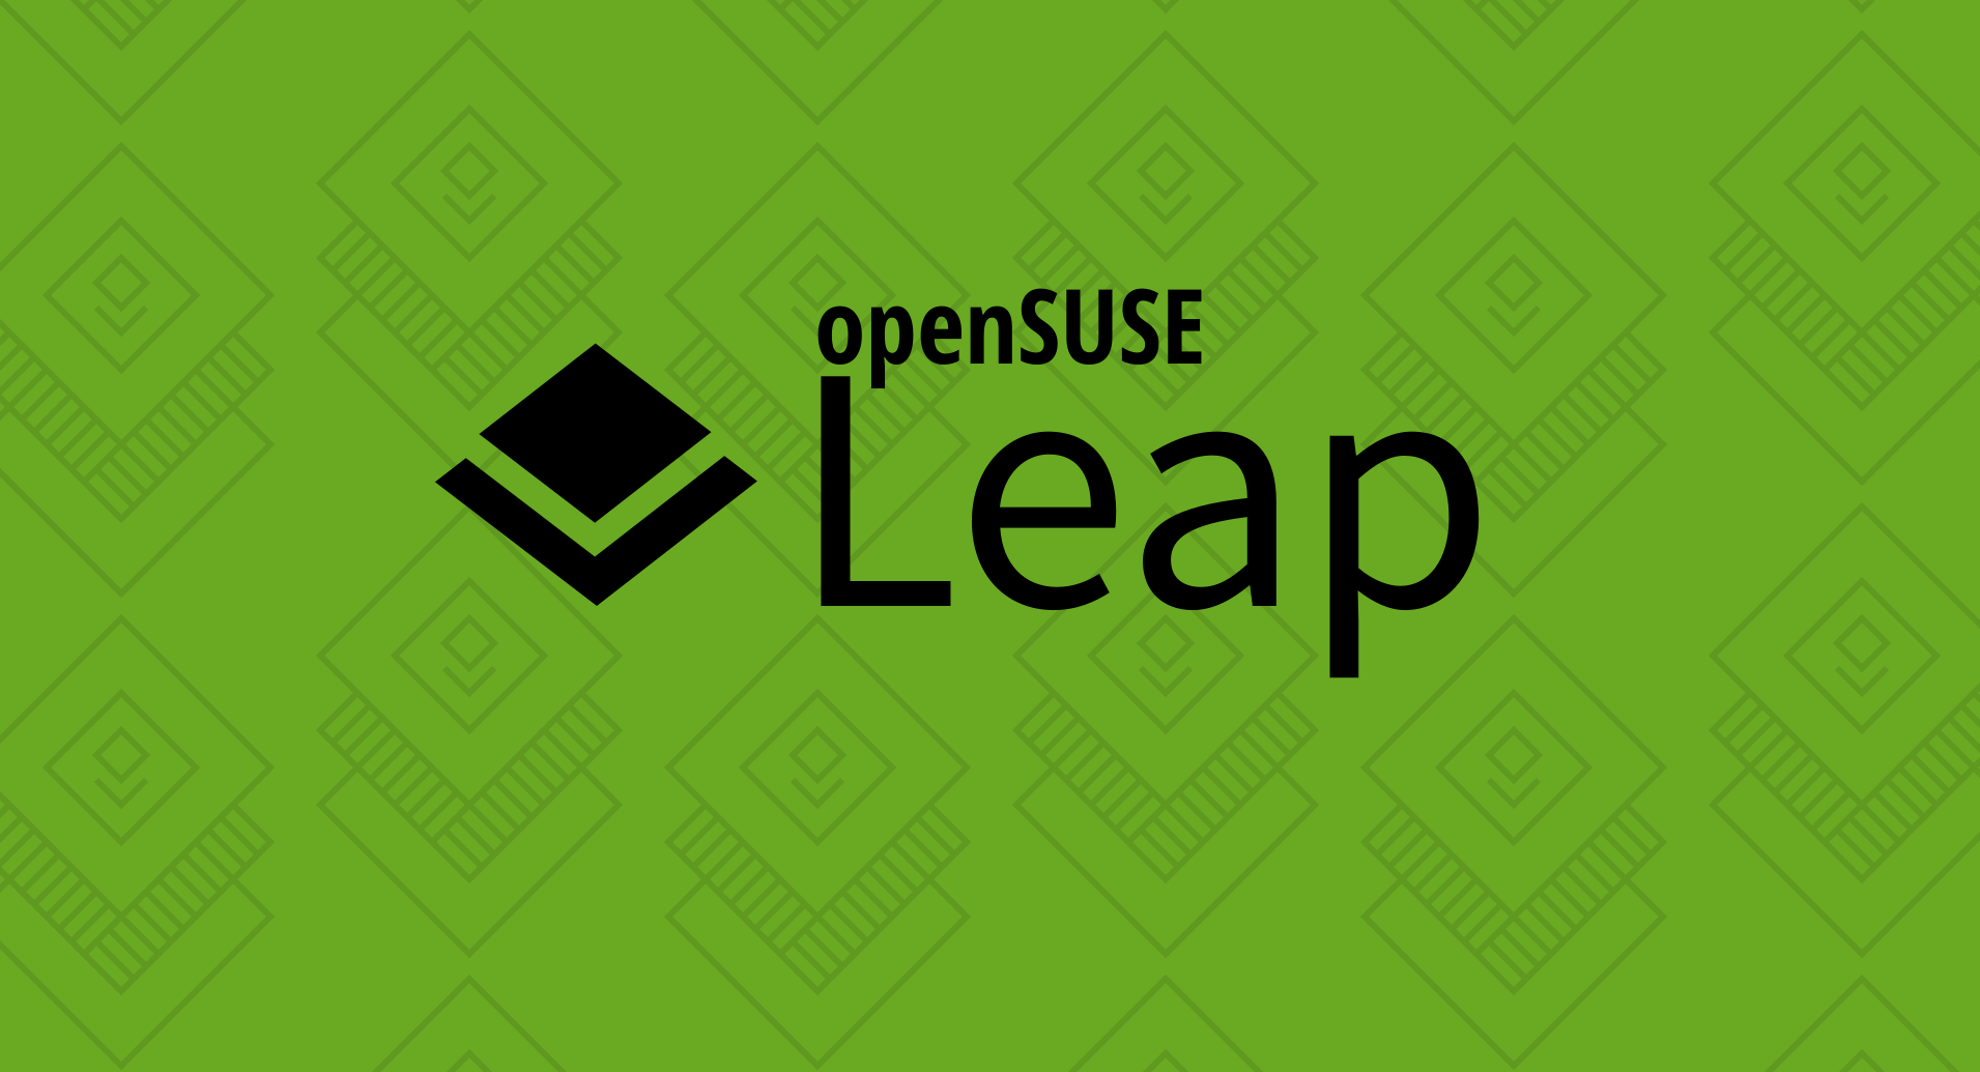 SUSE proposes synchronizing code streams, includes SLE binaries for openSUSE Leap